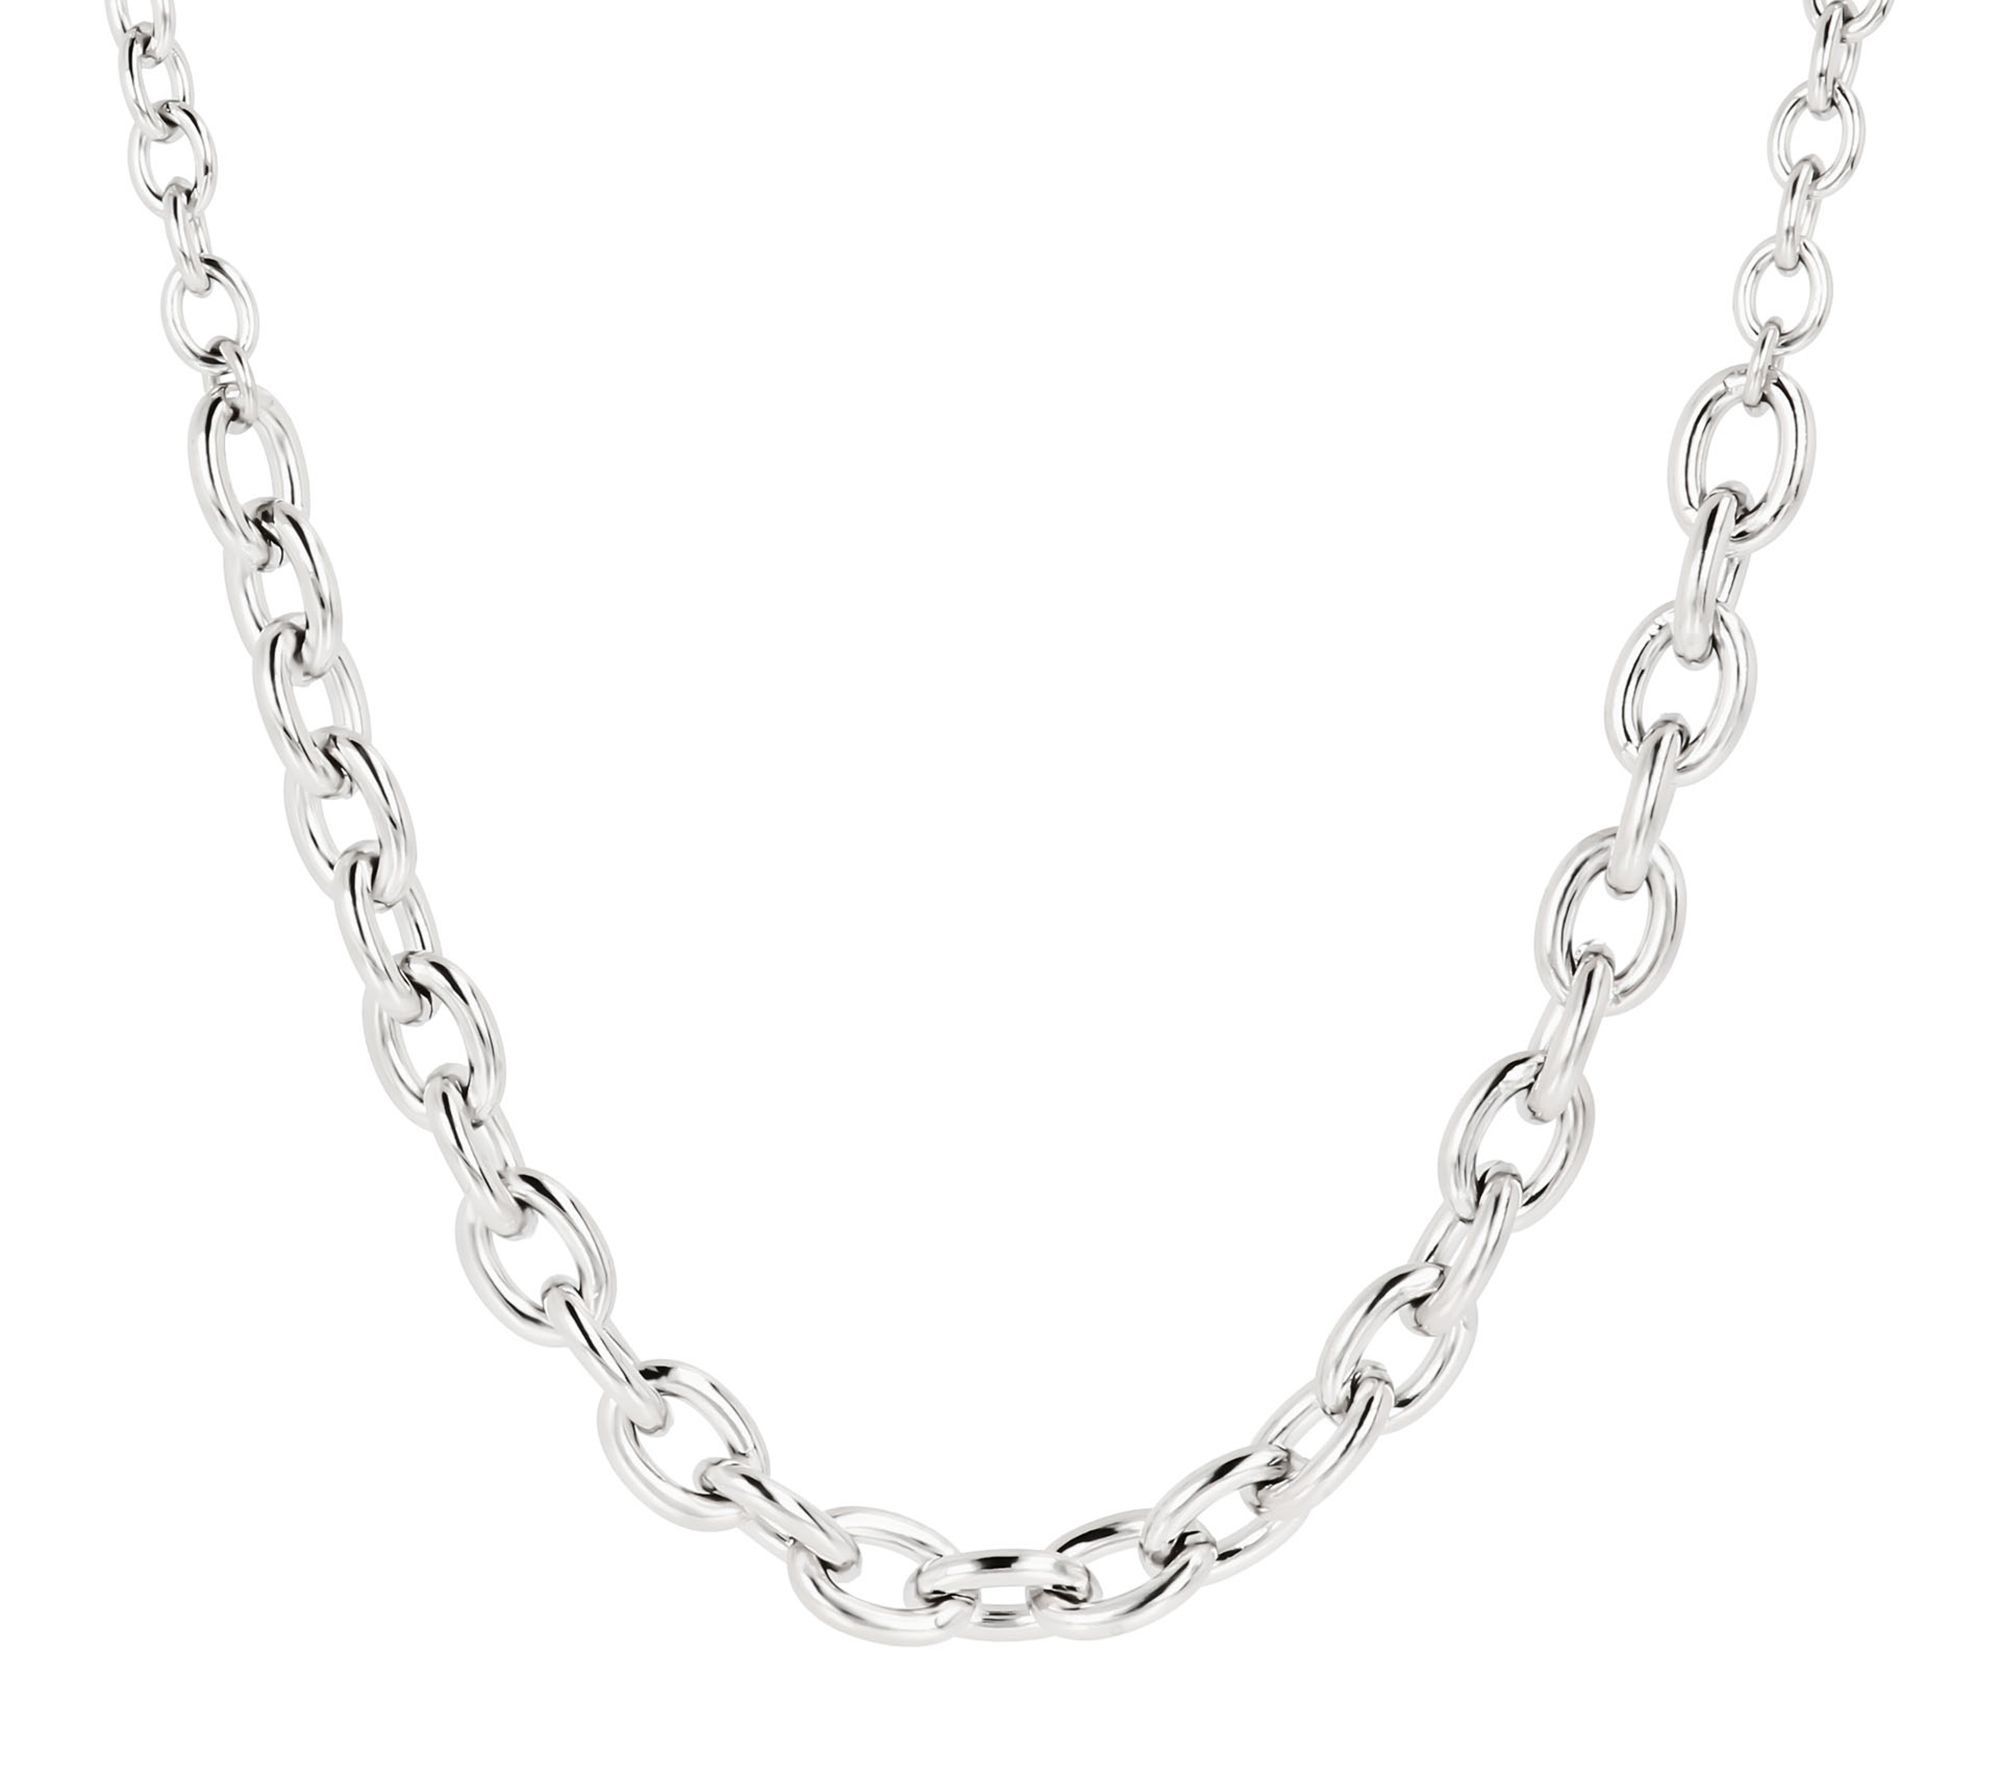 Steel by Design Graduated Oval Rolo Link Neckla ce - QVC.com